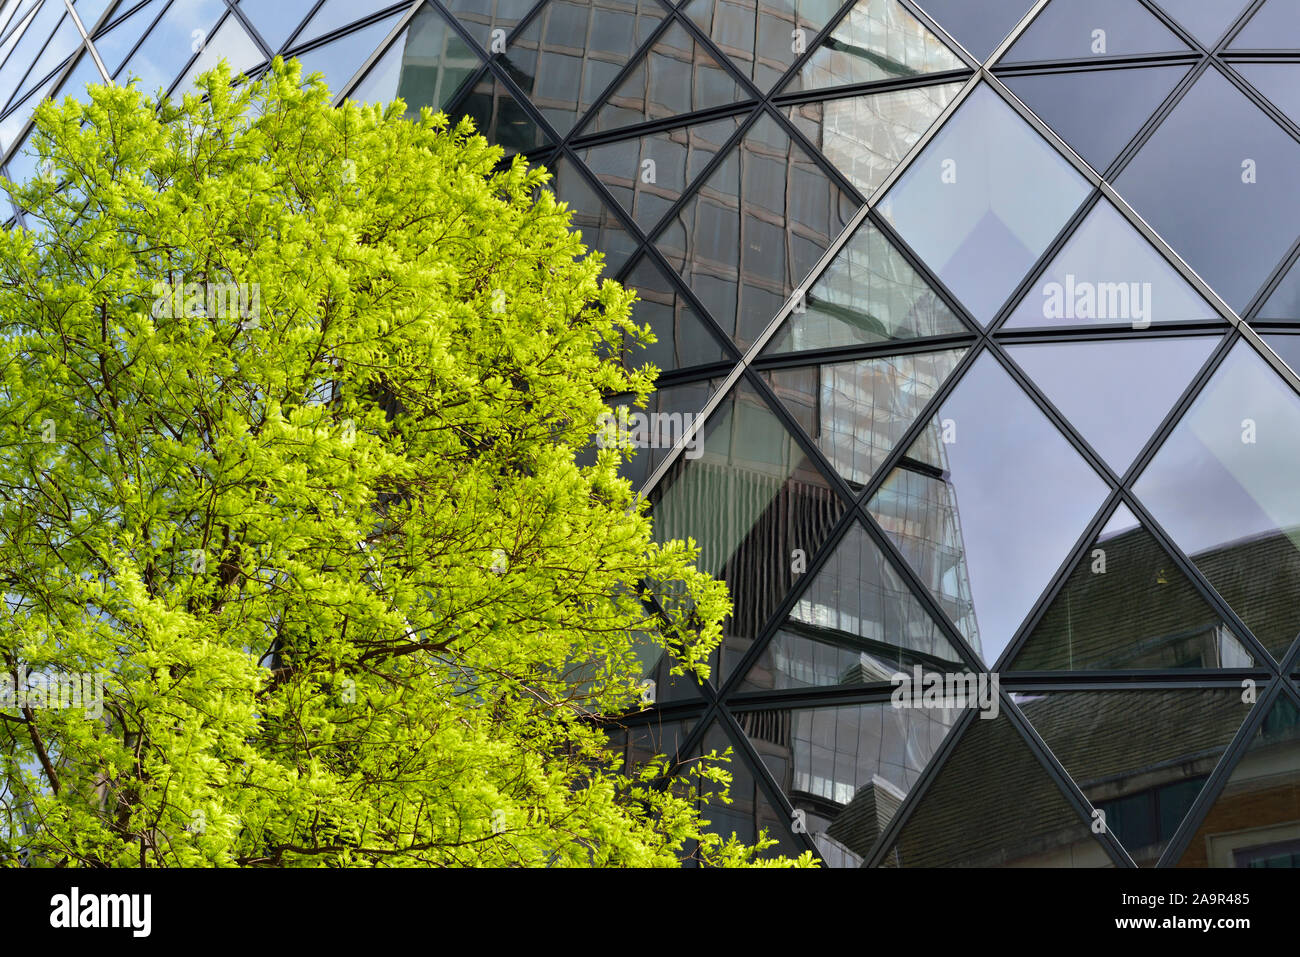 Swiss Re Tower, The Gherkin, 30 St Mary Axe, City of London, United Kingdom Stock Photo